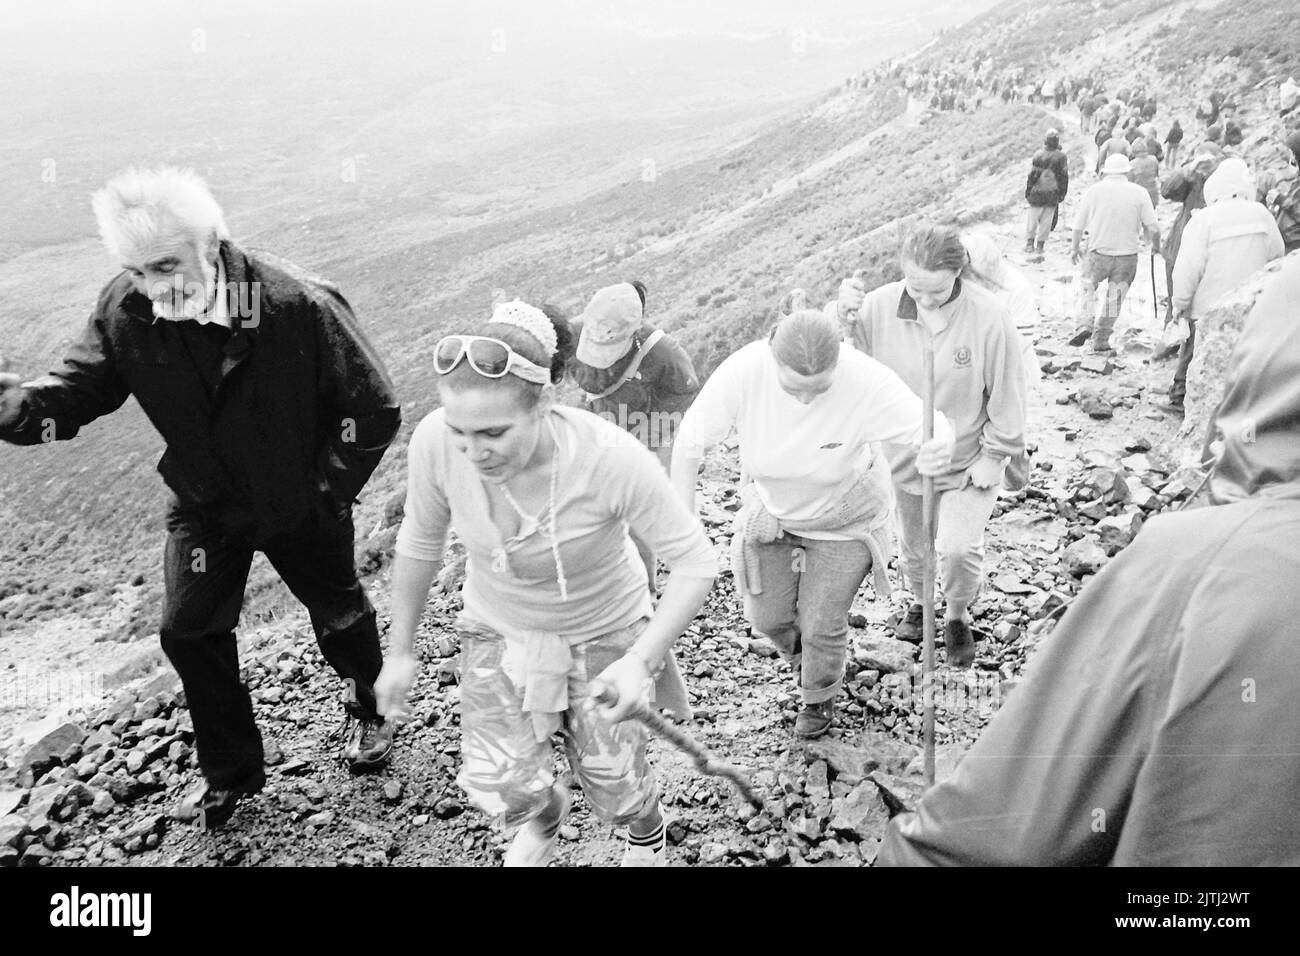 Black and white film footage of 'Reek Sunday', a guelling pilgrimage up Croagh Patrick, County Mayo on the last Sunday in July each year, to visit the location where Saint Patrick stayed for 40 days, and from where his was said to have banished the lizards and snakes from Ireland. Stock Photo